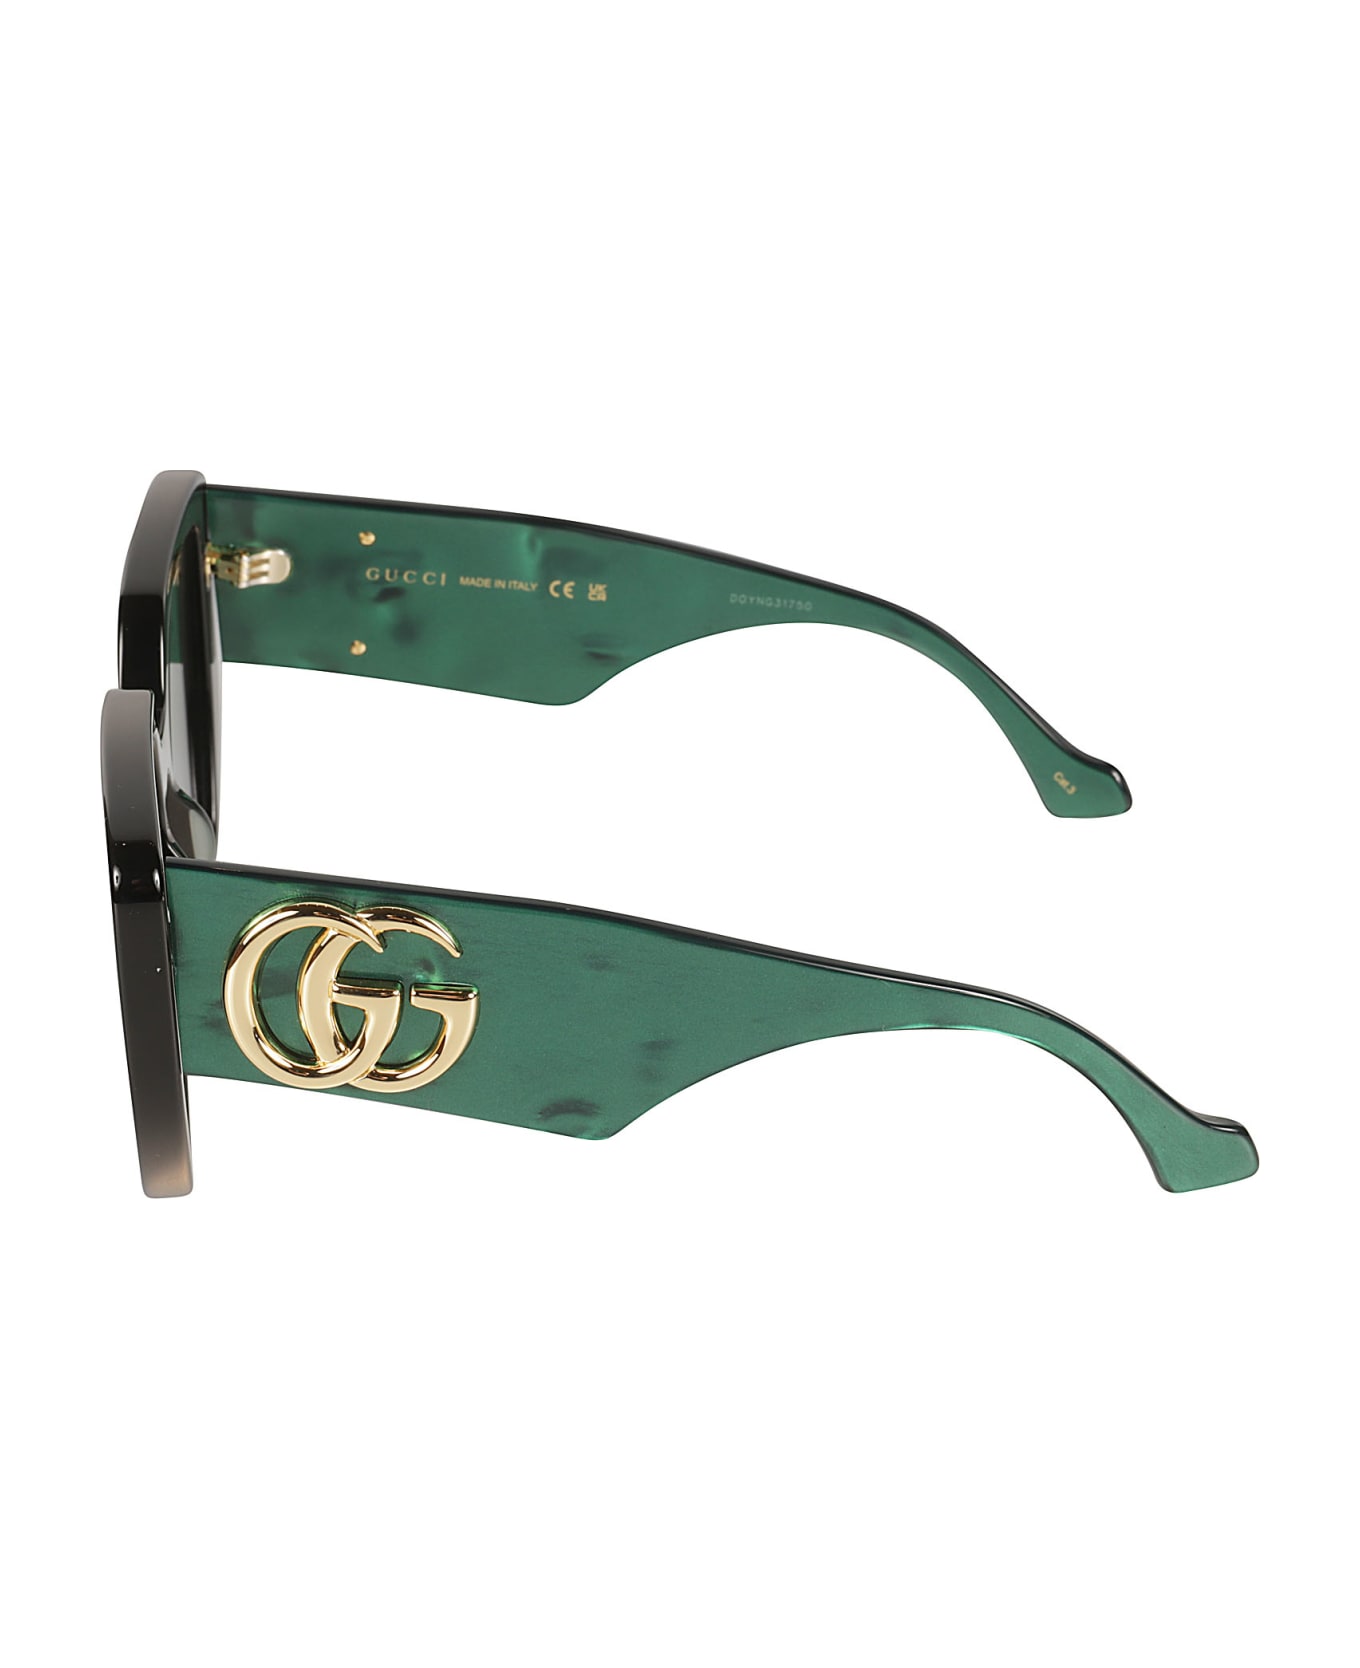 Gucci Eyewear Double Gg Plaque Square Frame Sunglasses - Black/Green